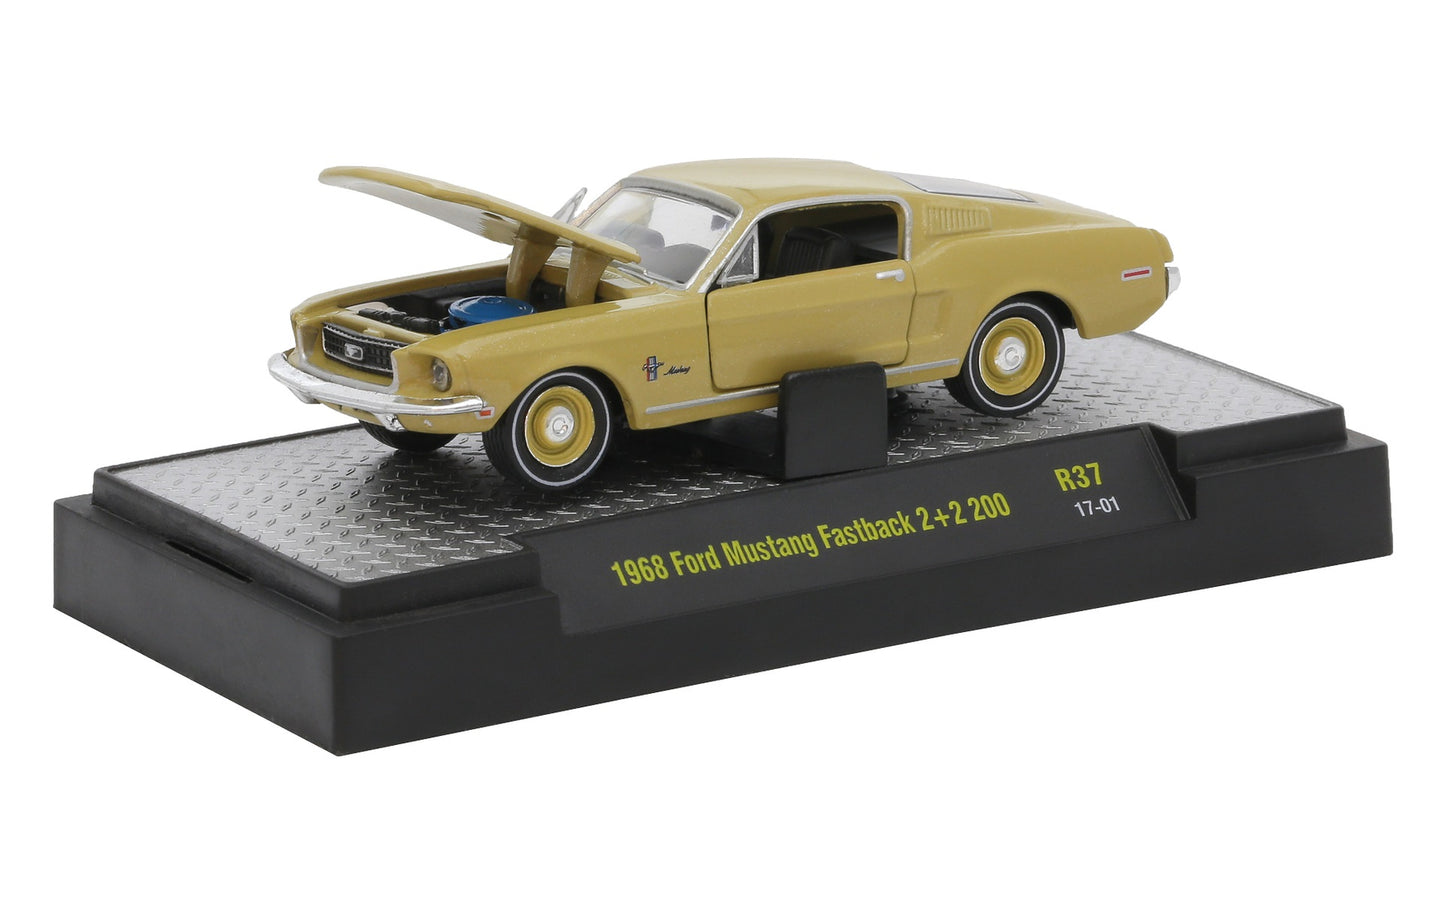 Release 37 - 1968 Ford Mustang Fastback 2+2 200 Die Cast Model